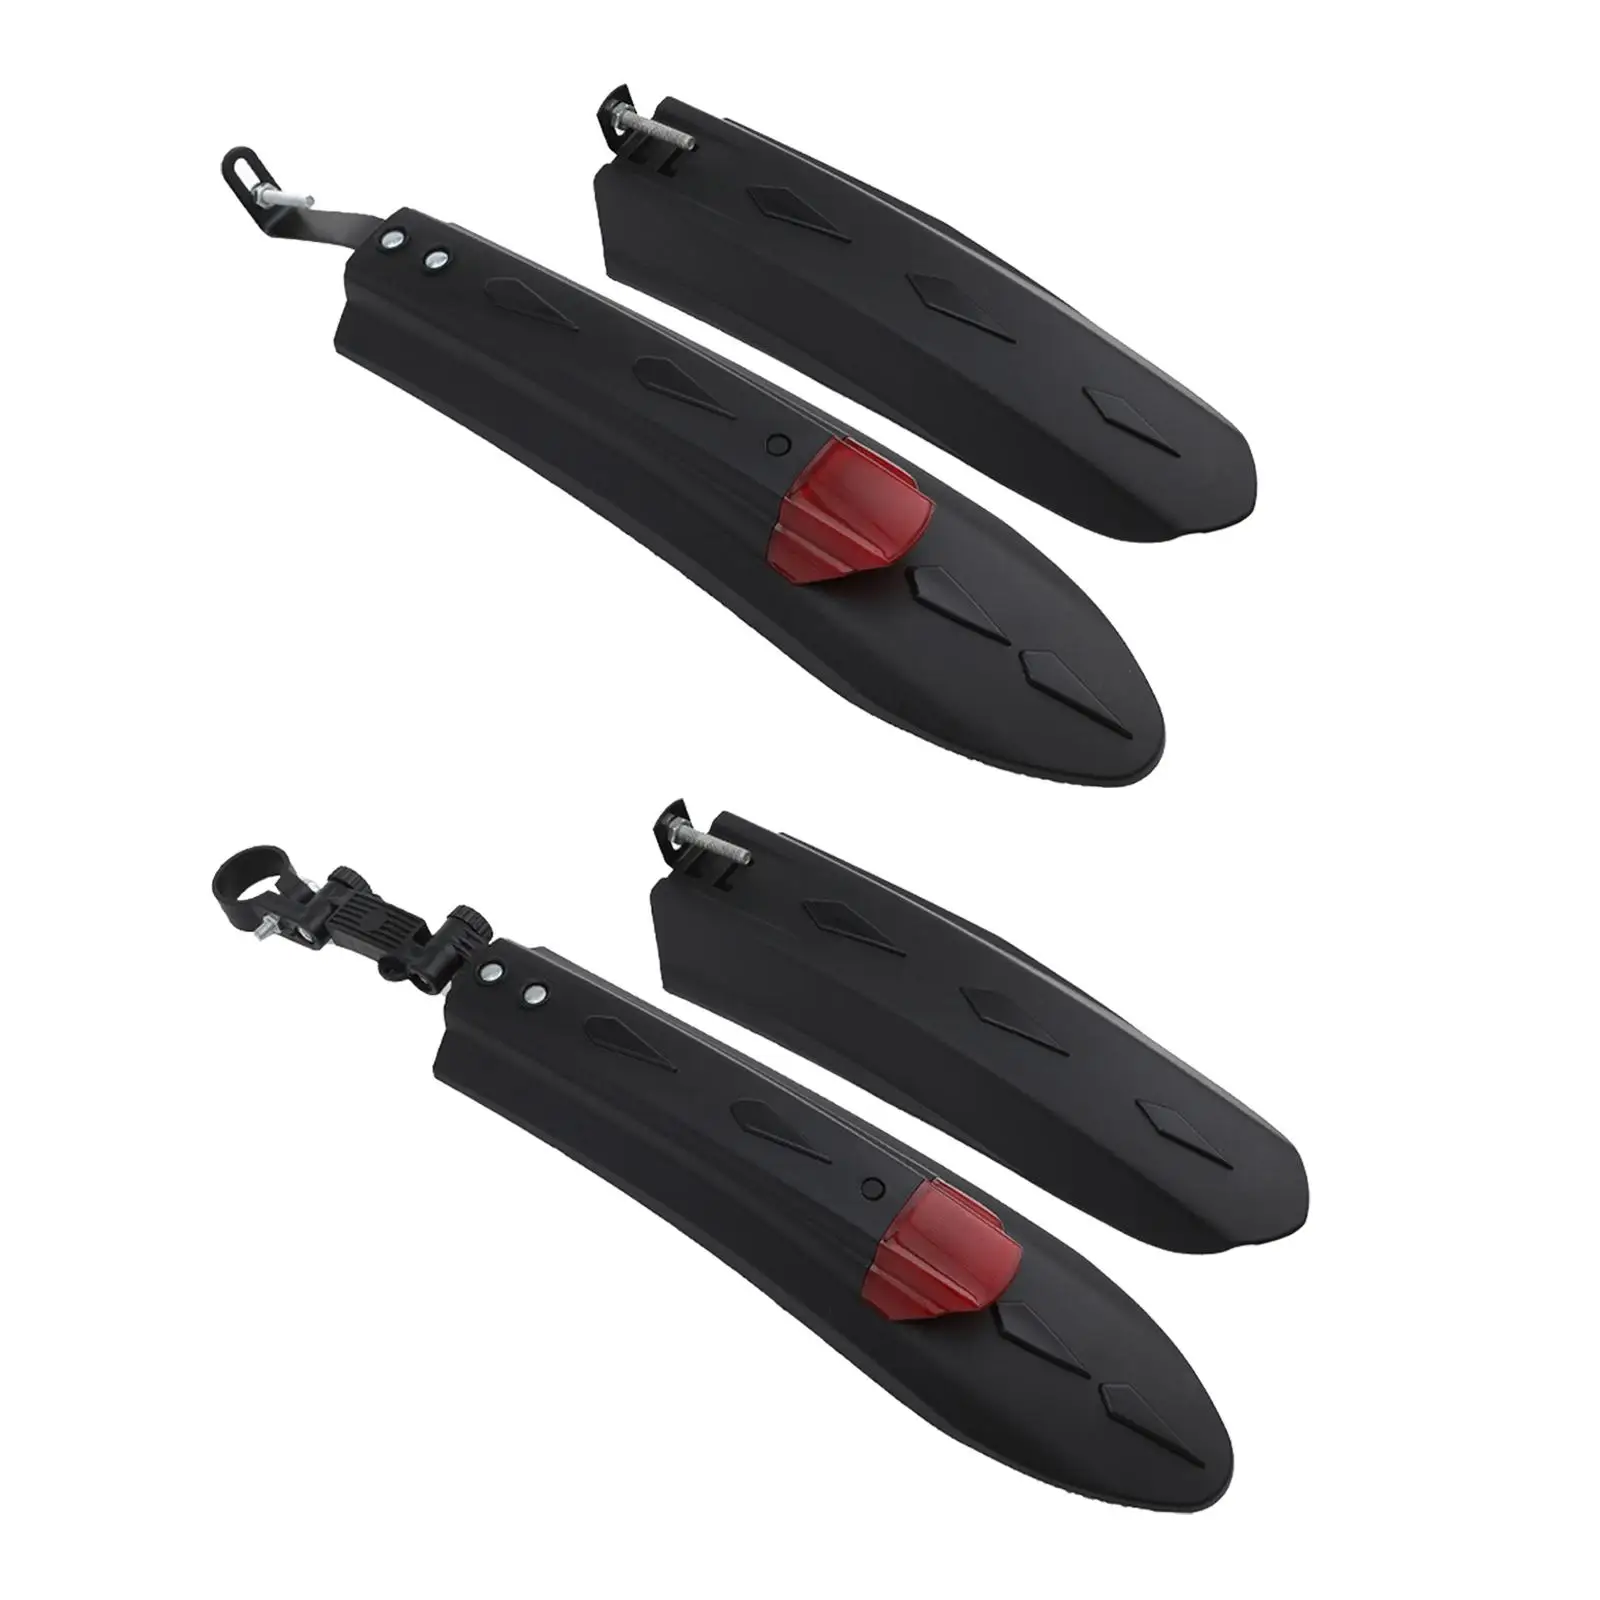 Bike Mudguard Set Portable with Light Simple Installation Bike Front & Rear Fenders for Riding Cycling Sports Travel Accessories